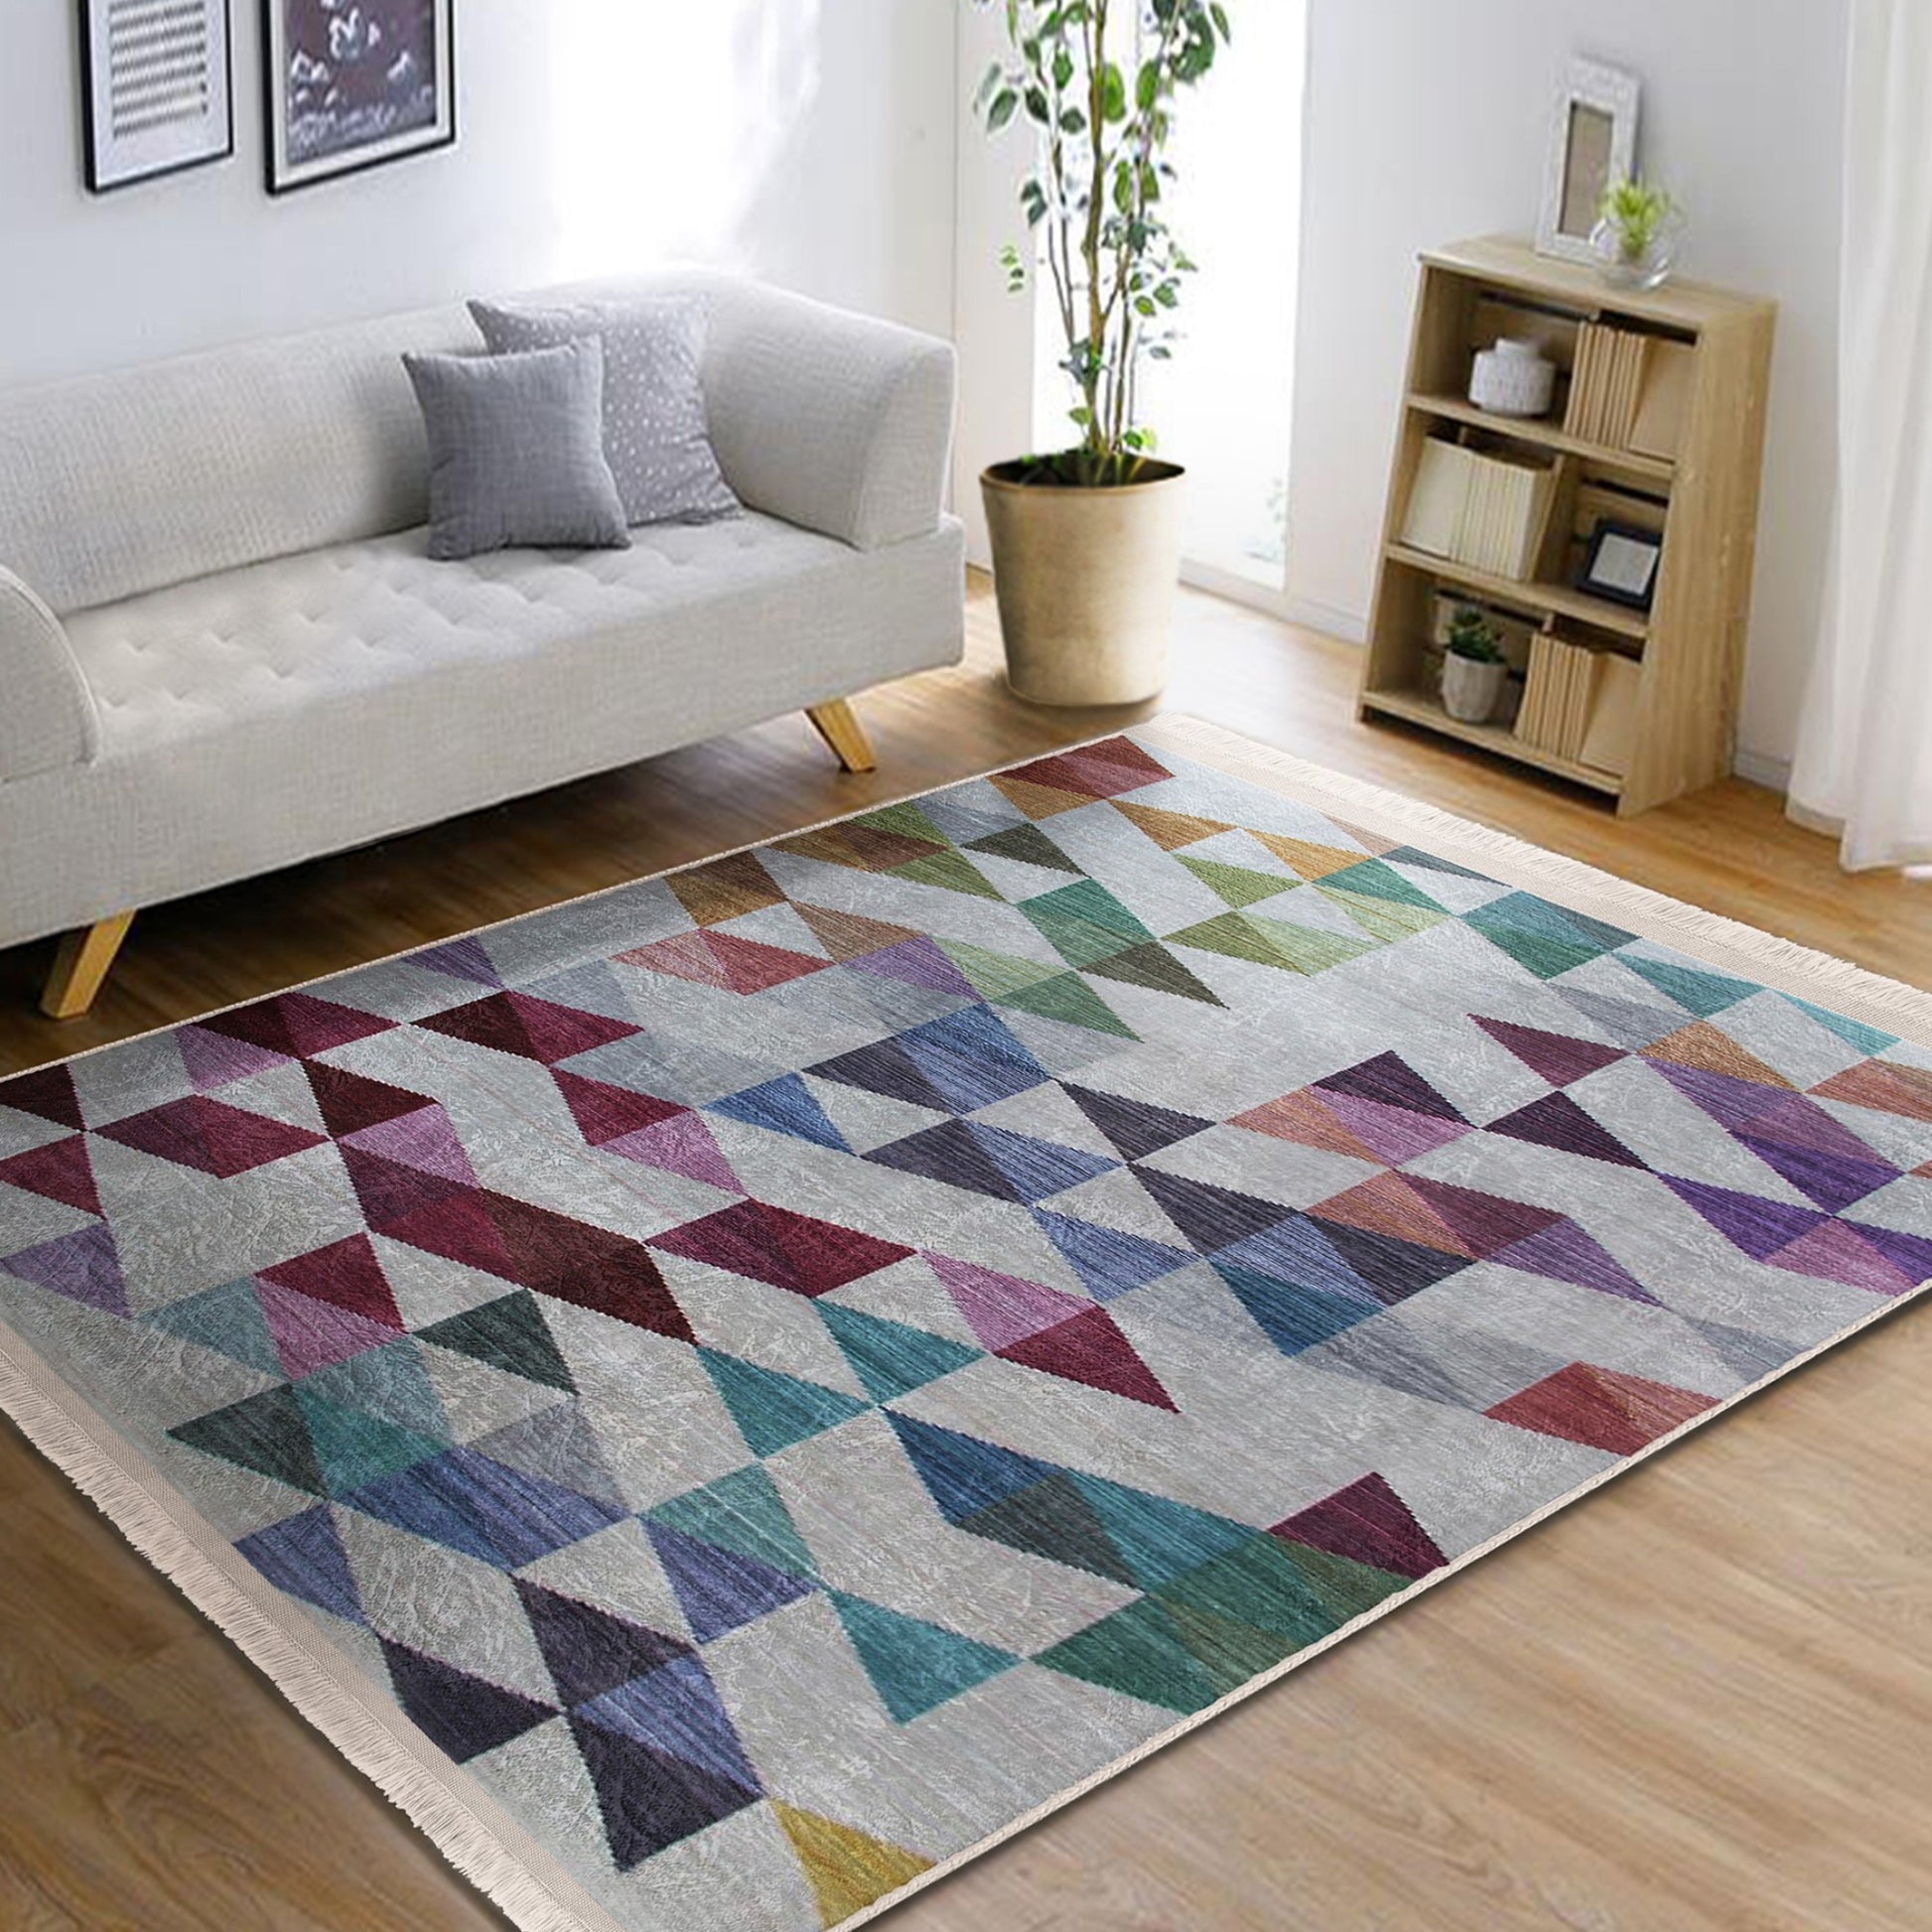 Tranquil Geometric Rug for a Stylish Living Space